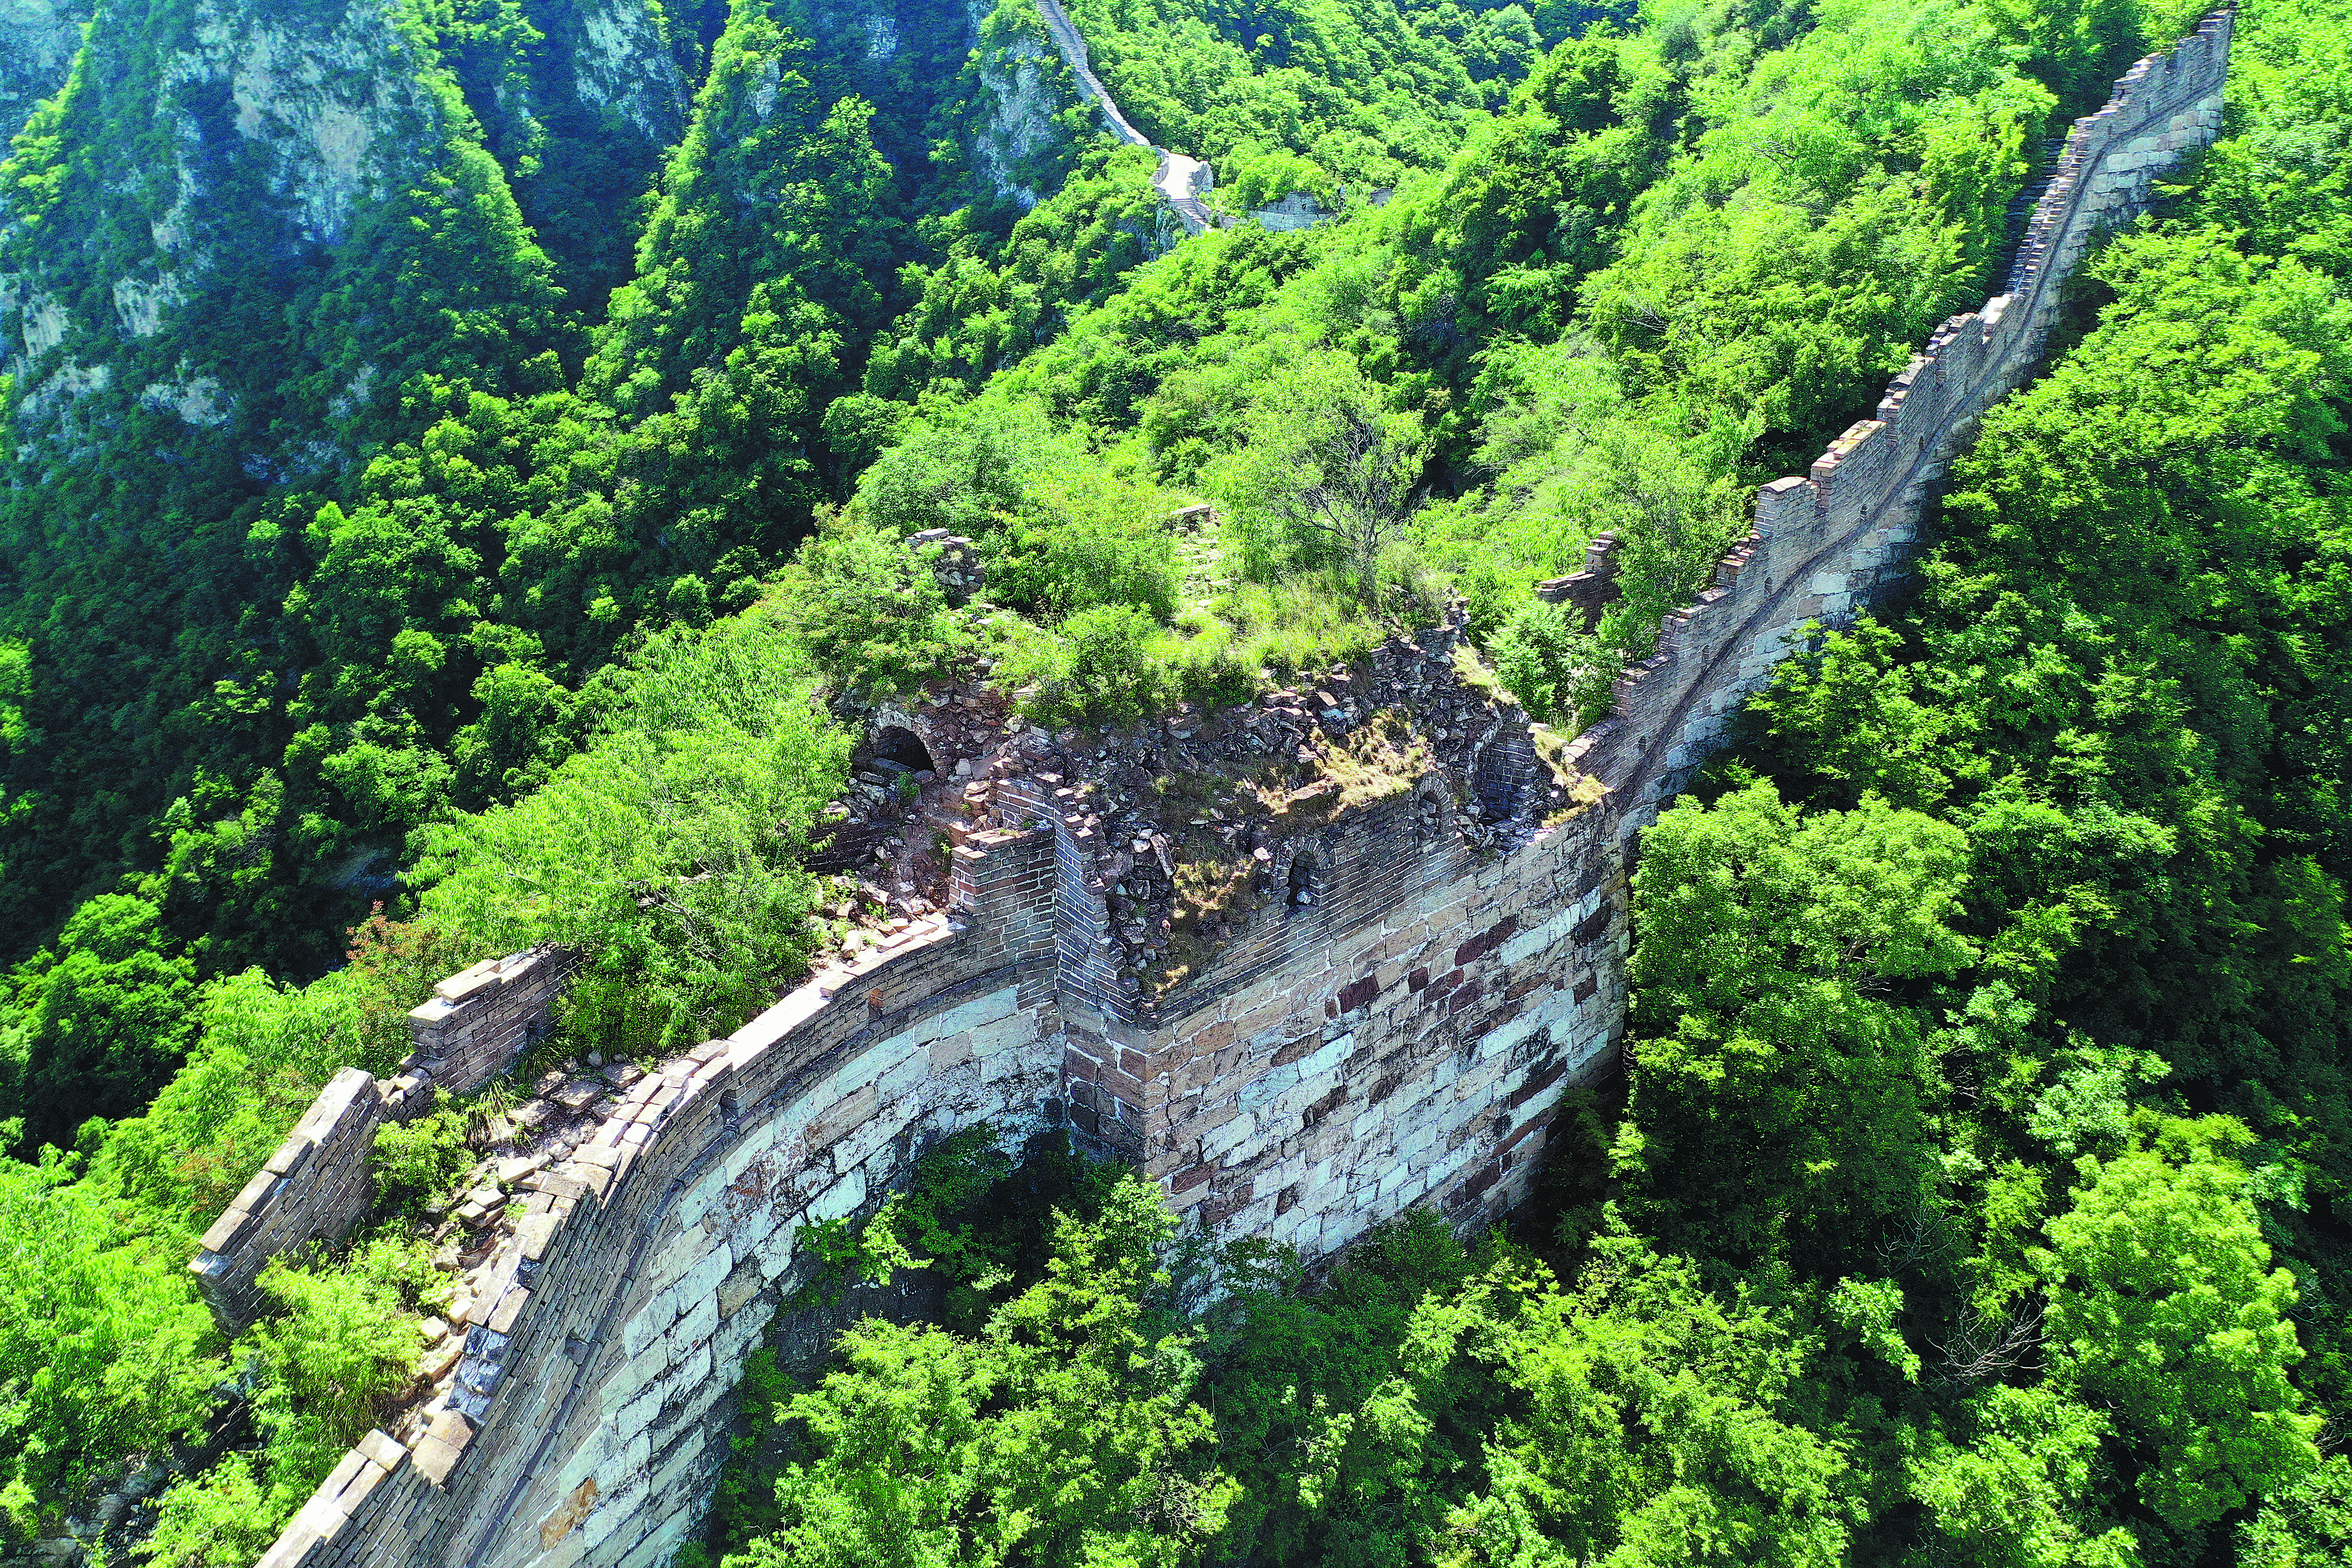 The Jiankou section of the Great Wall ribbons over the top of jagged green mountains in Huairou district, northern Beijing